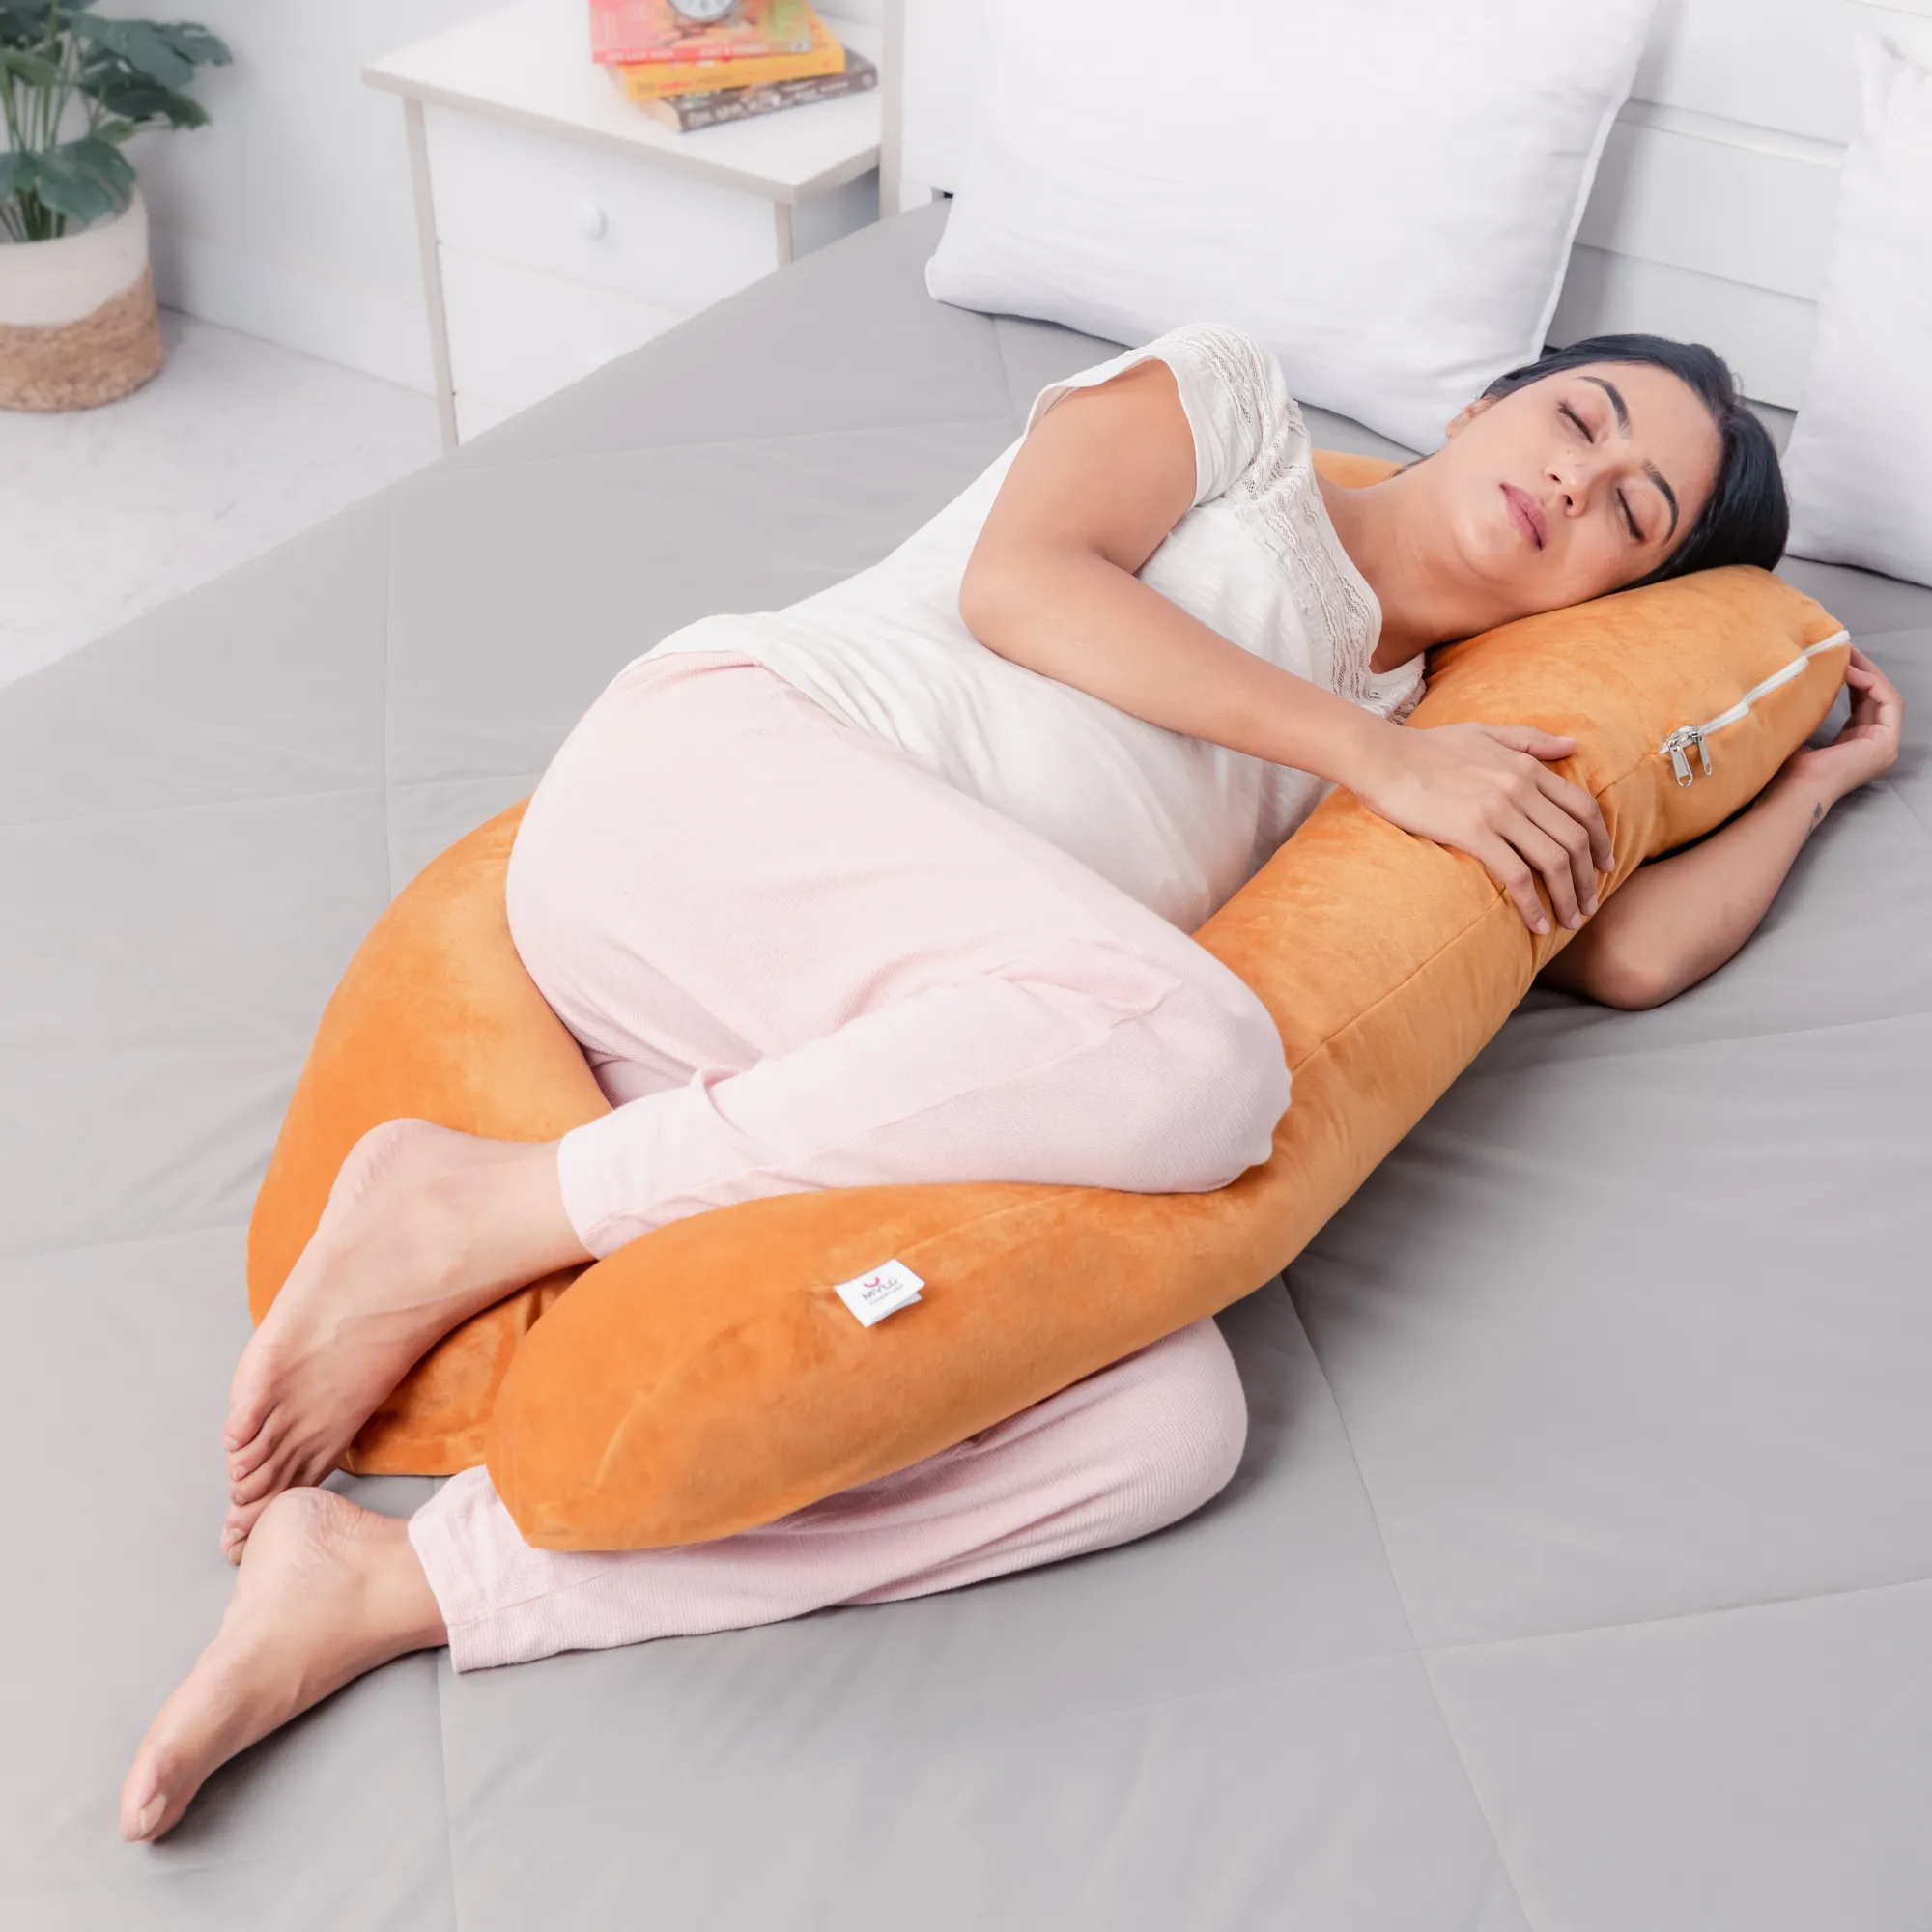 Premium Pregnancy & Maternity Support Pillow - camel brown